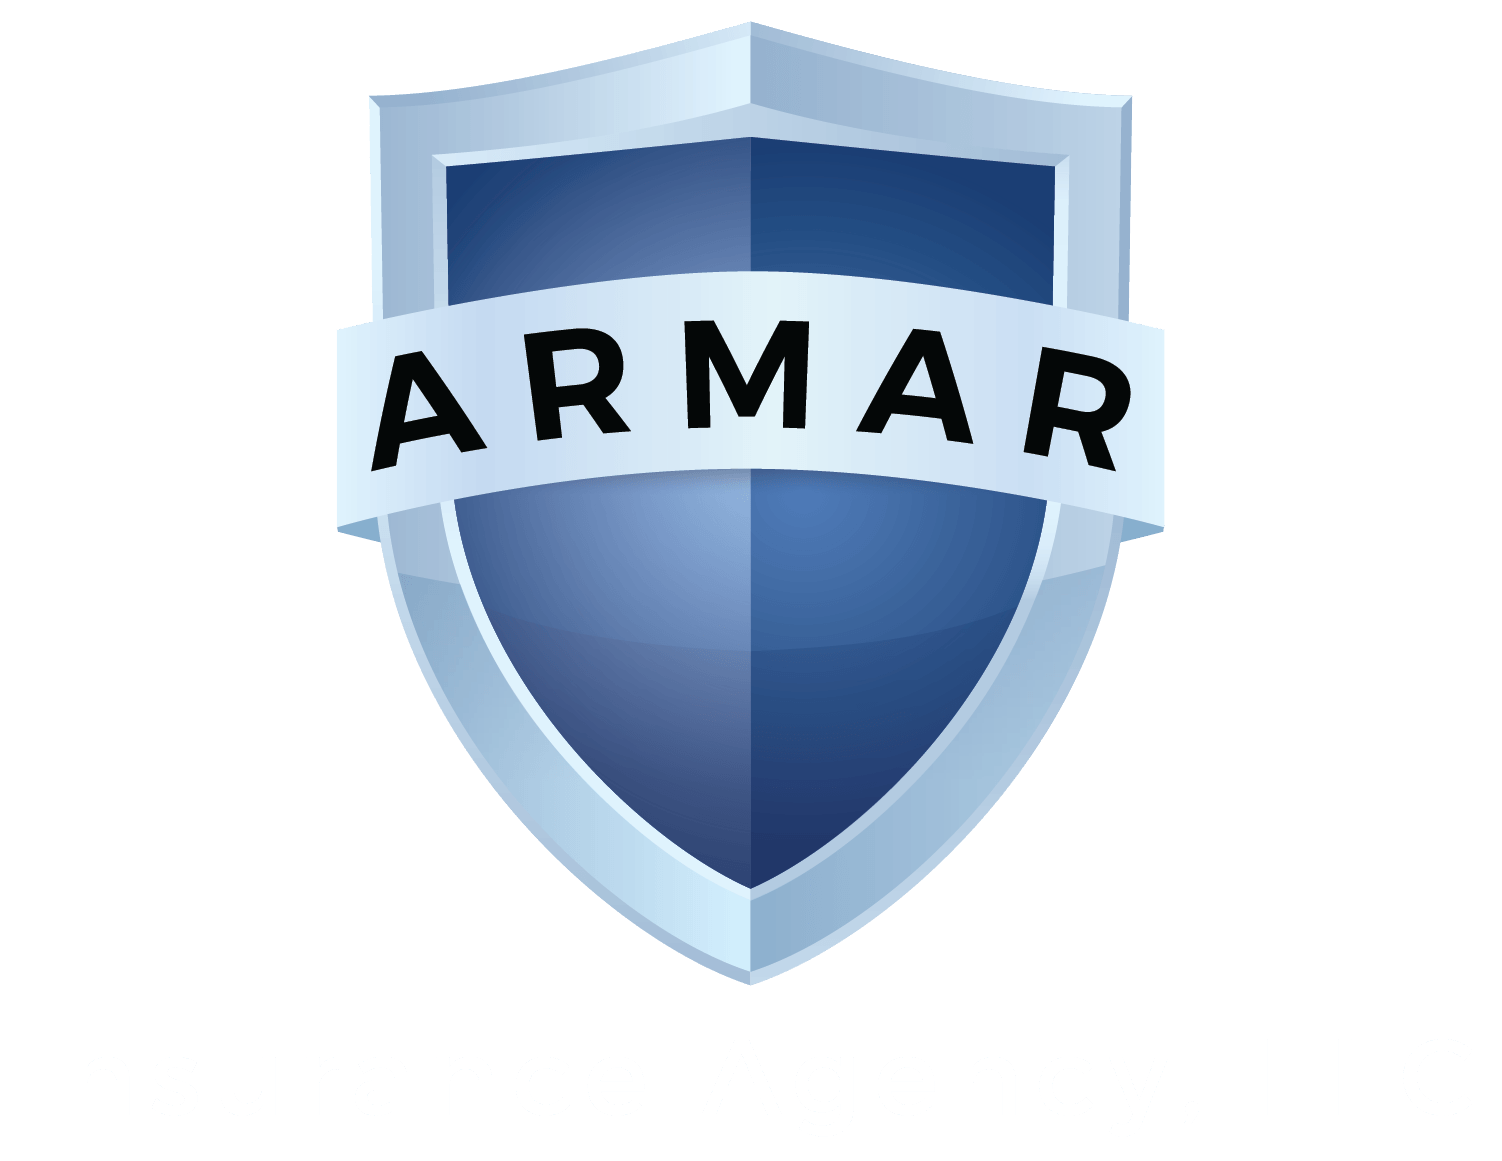 Armar Logo - Personal and Business Insurance. Armar Insurance Agency